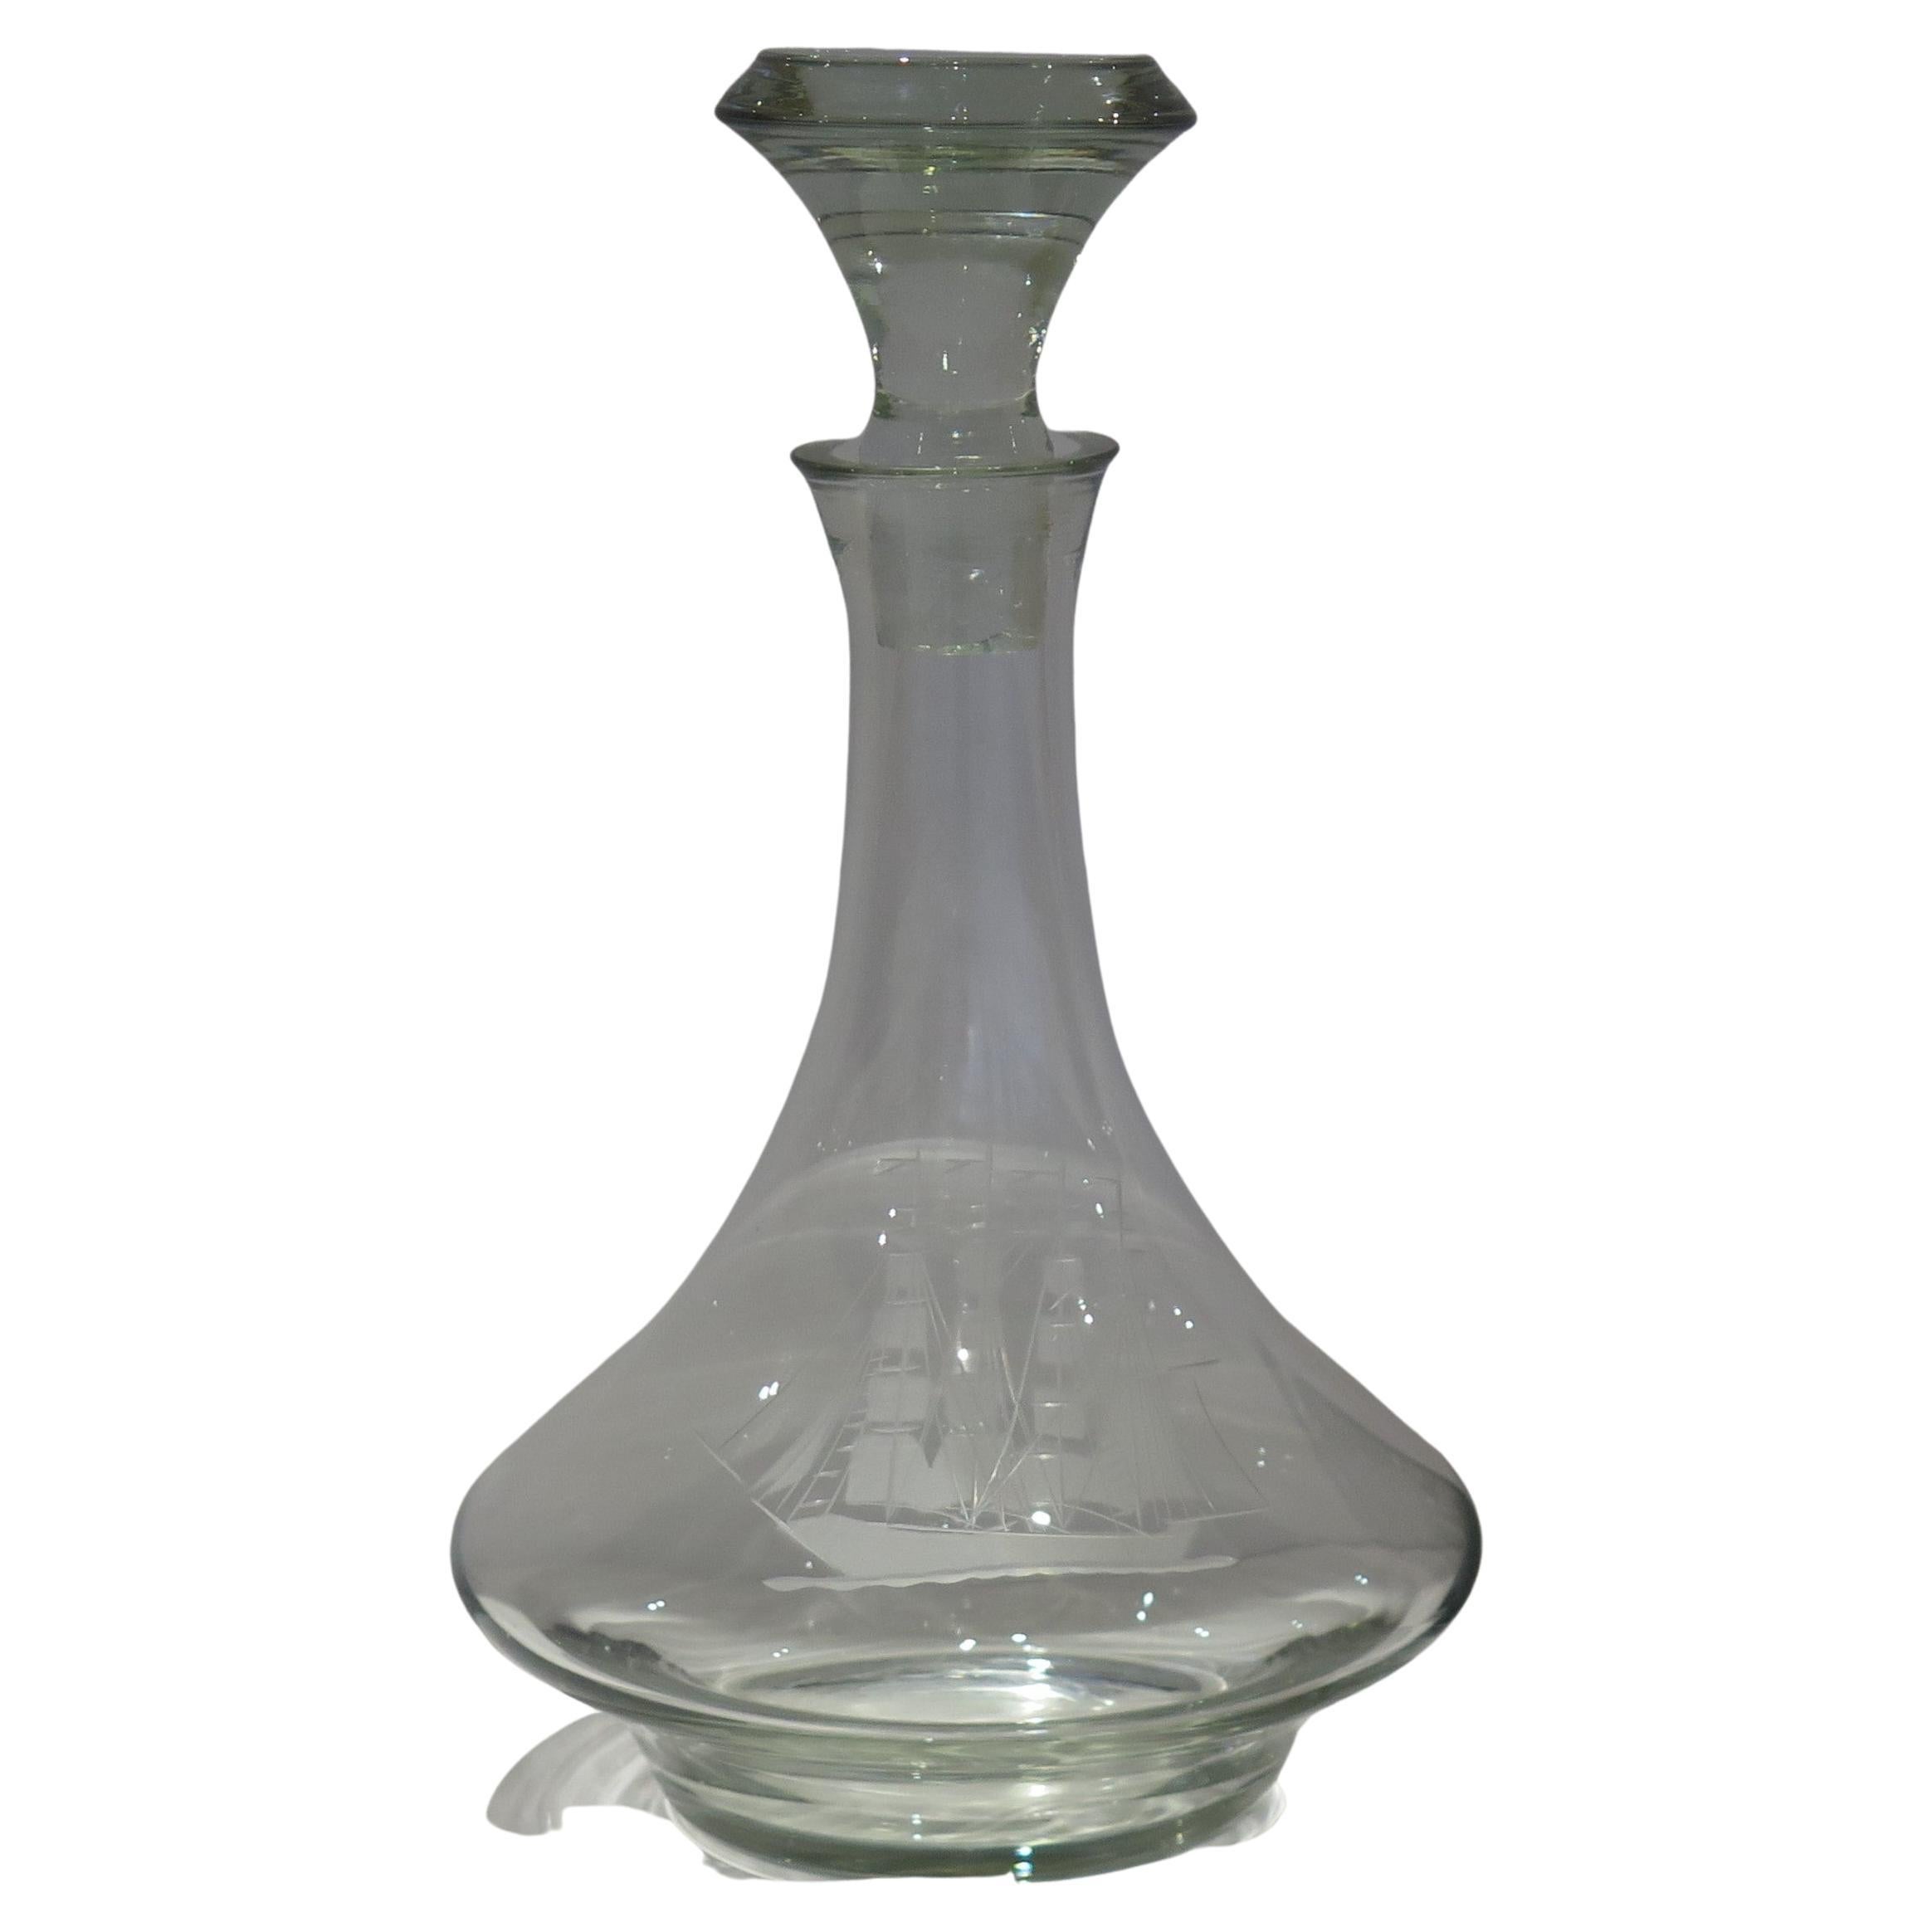 This is a very large ( 1.5 litre) high quality ship's decanter, having an engraved image of a square rigger ship with a wide base made from heavy lead crystal or cut-glass having a soft light grey color.

The decanter sits on a low foot and is made